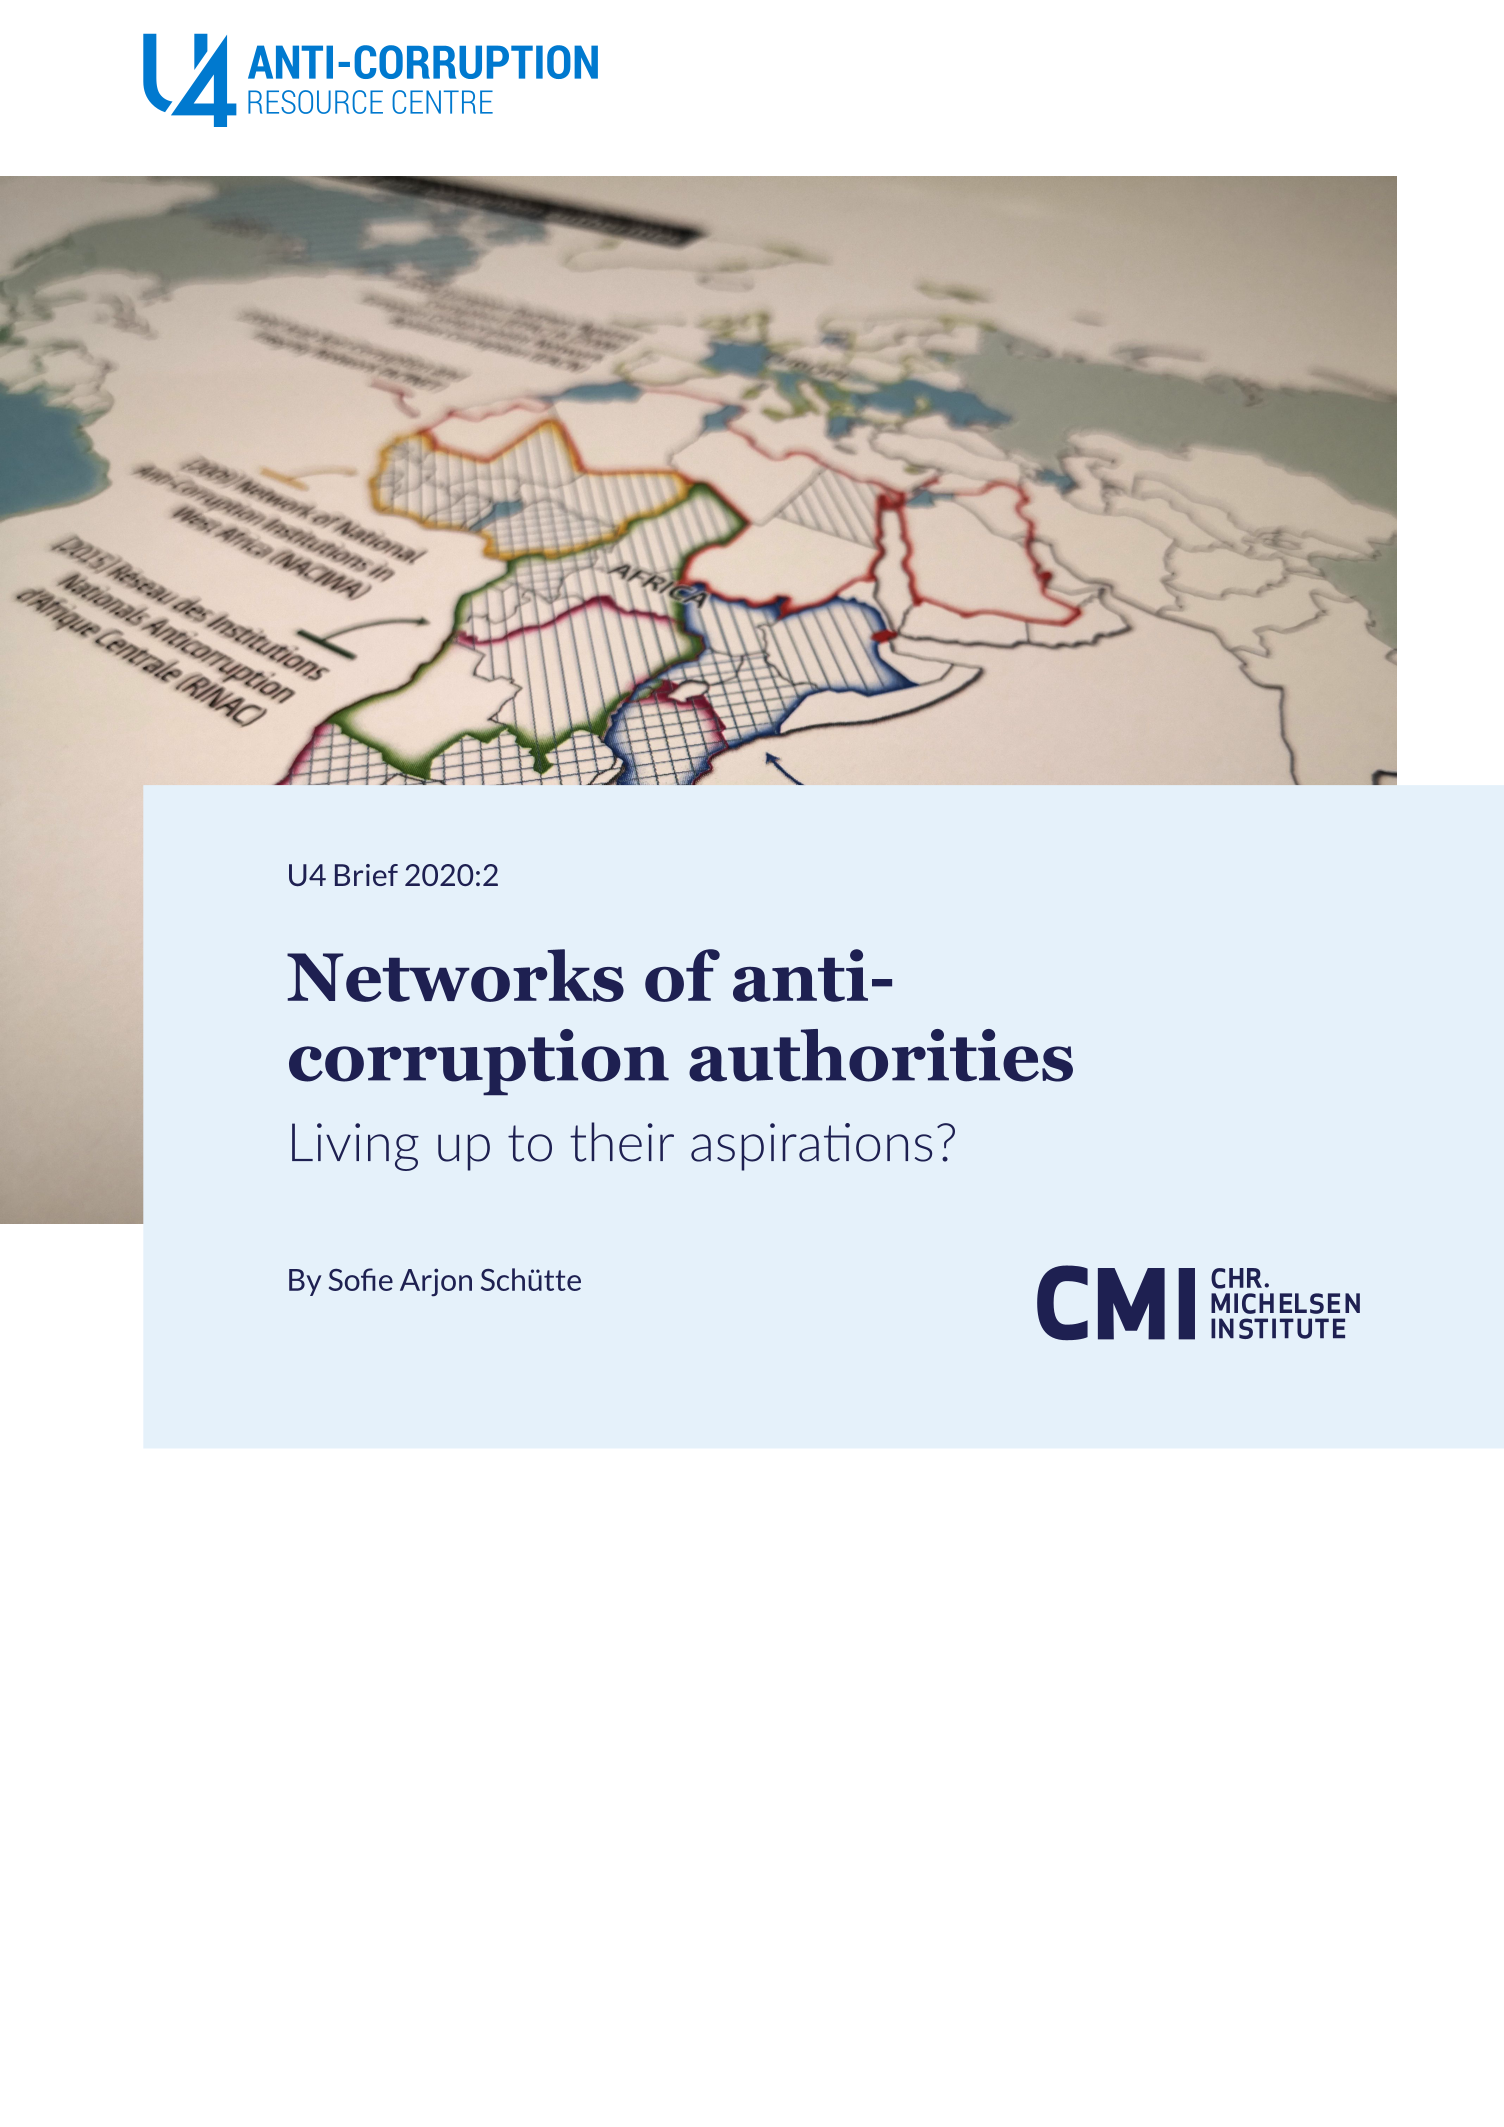 Networks of anti-corruption authorities